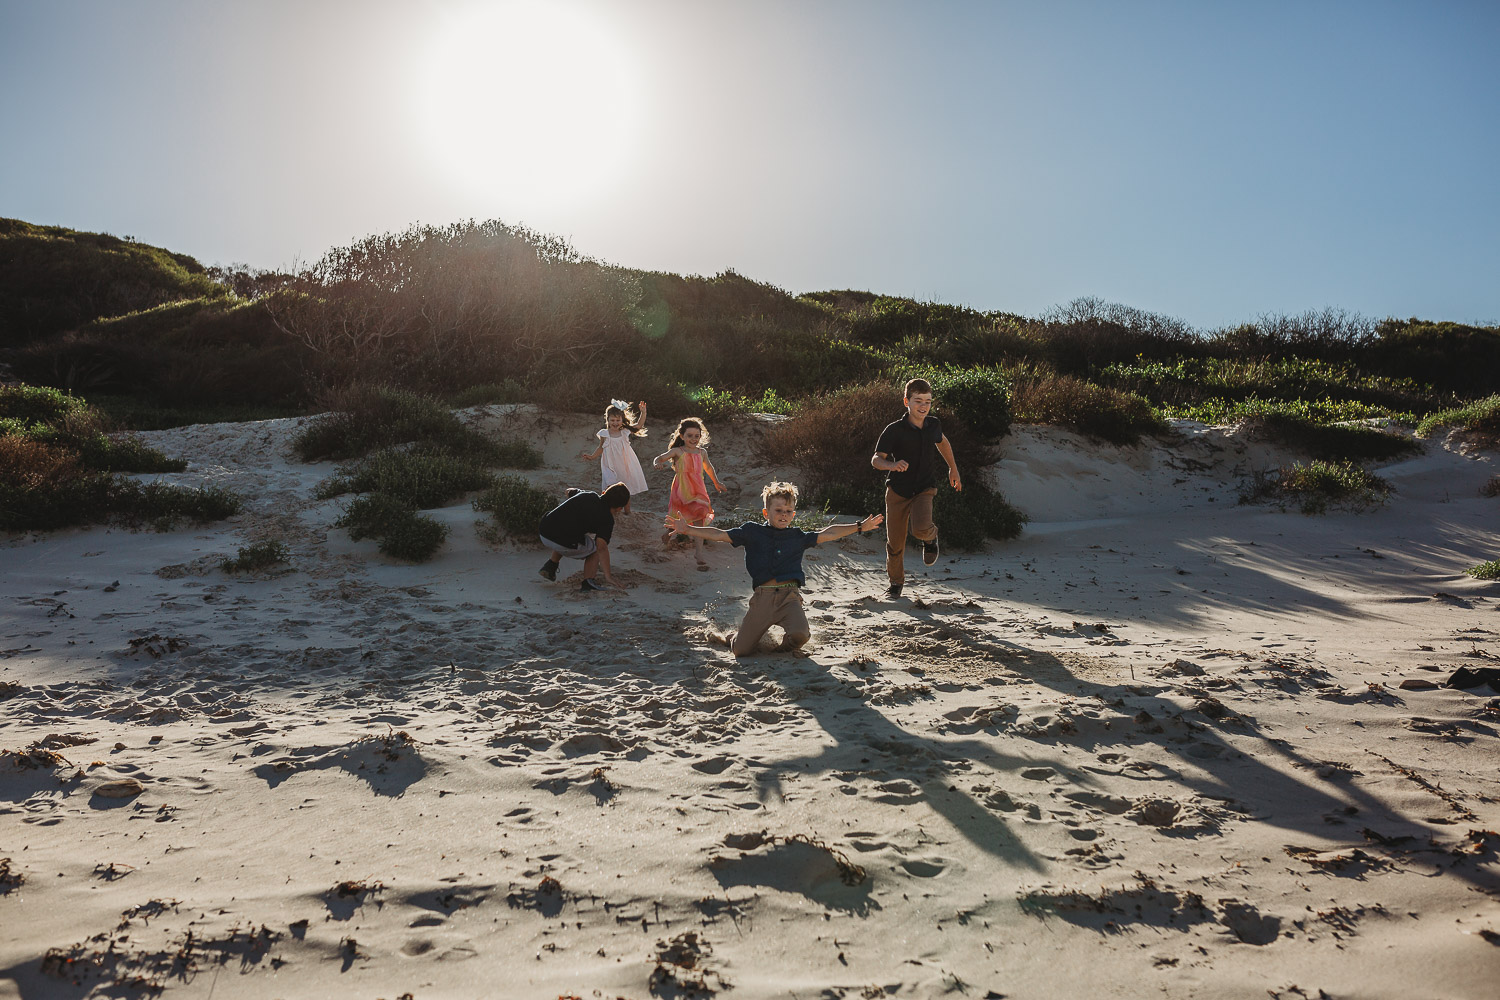 Children racing down a sand dune at the beach